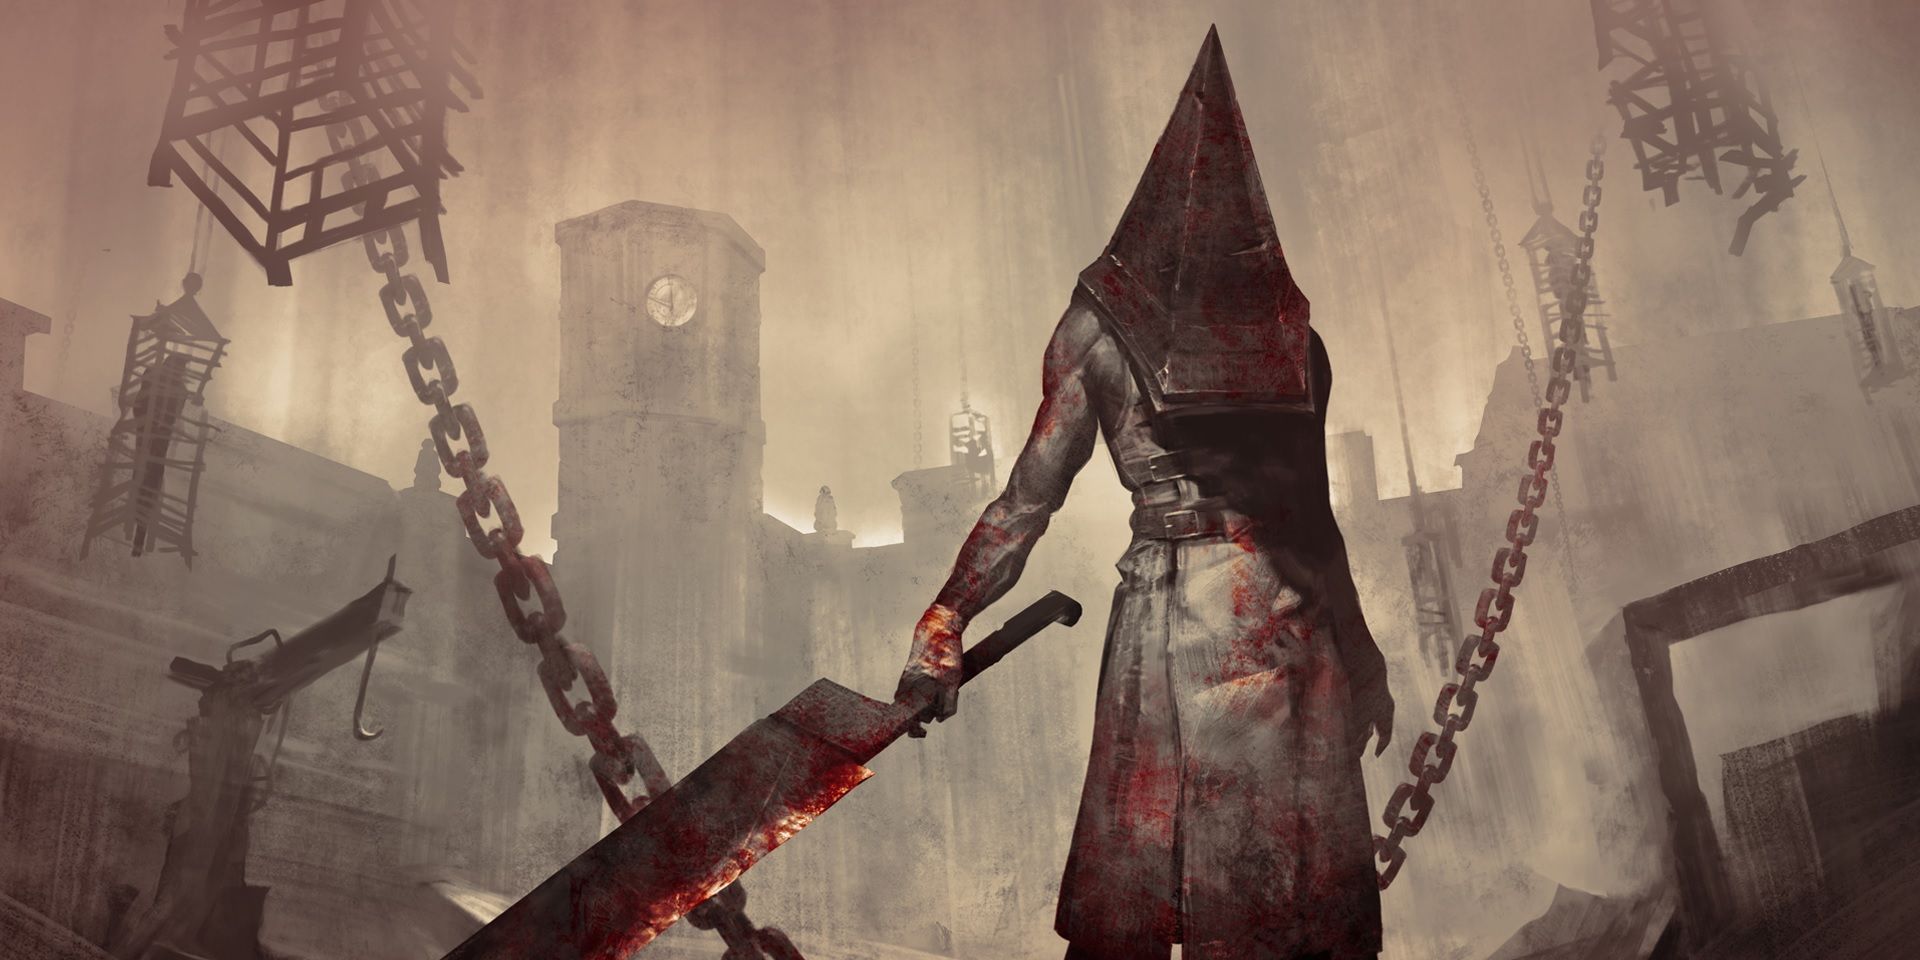 Silent Hill Reboot Might Be Real After All As Rumors Deemed 'Credible